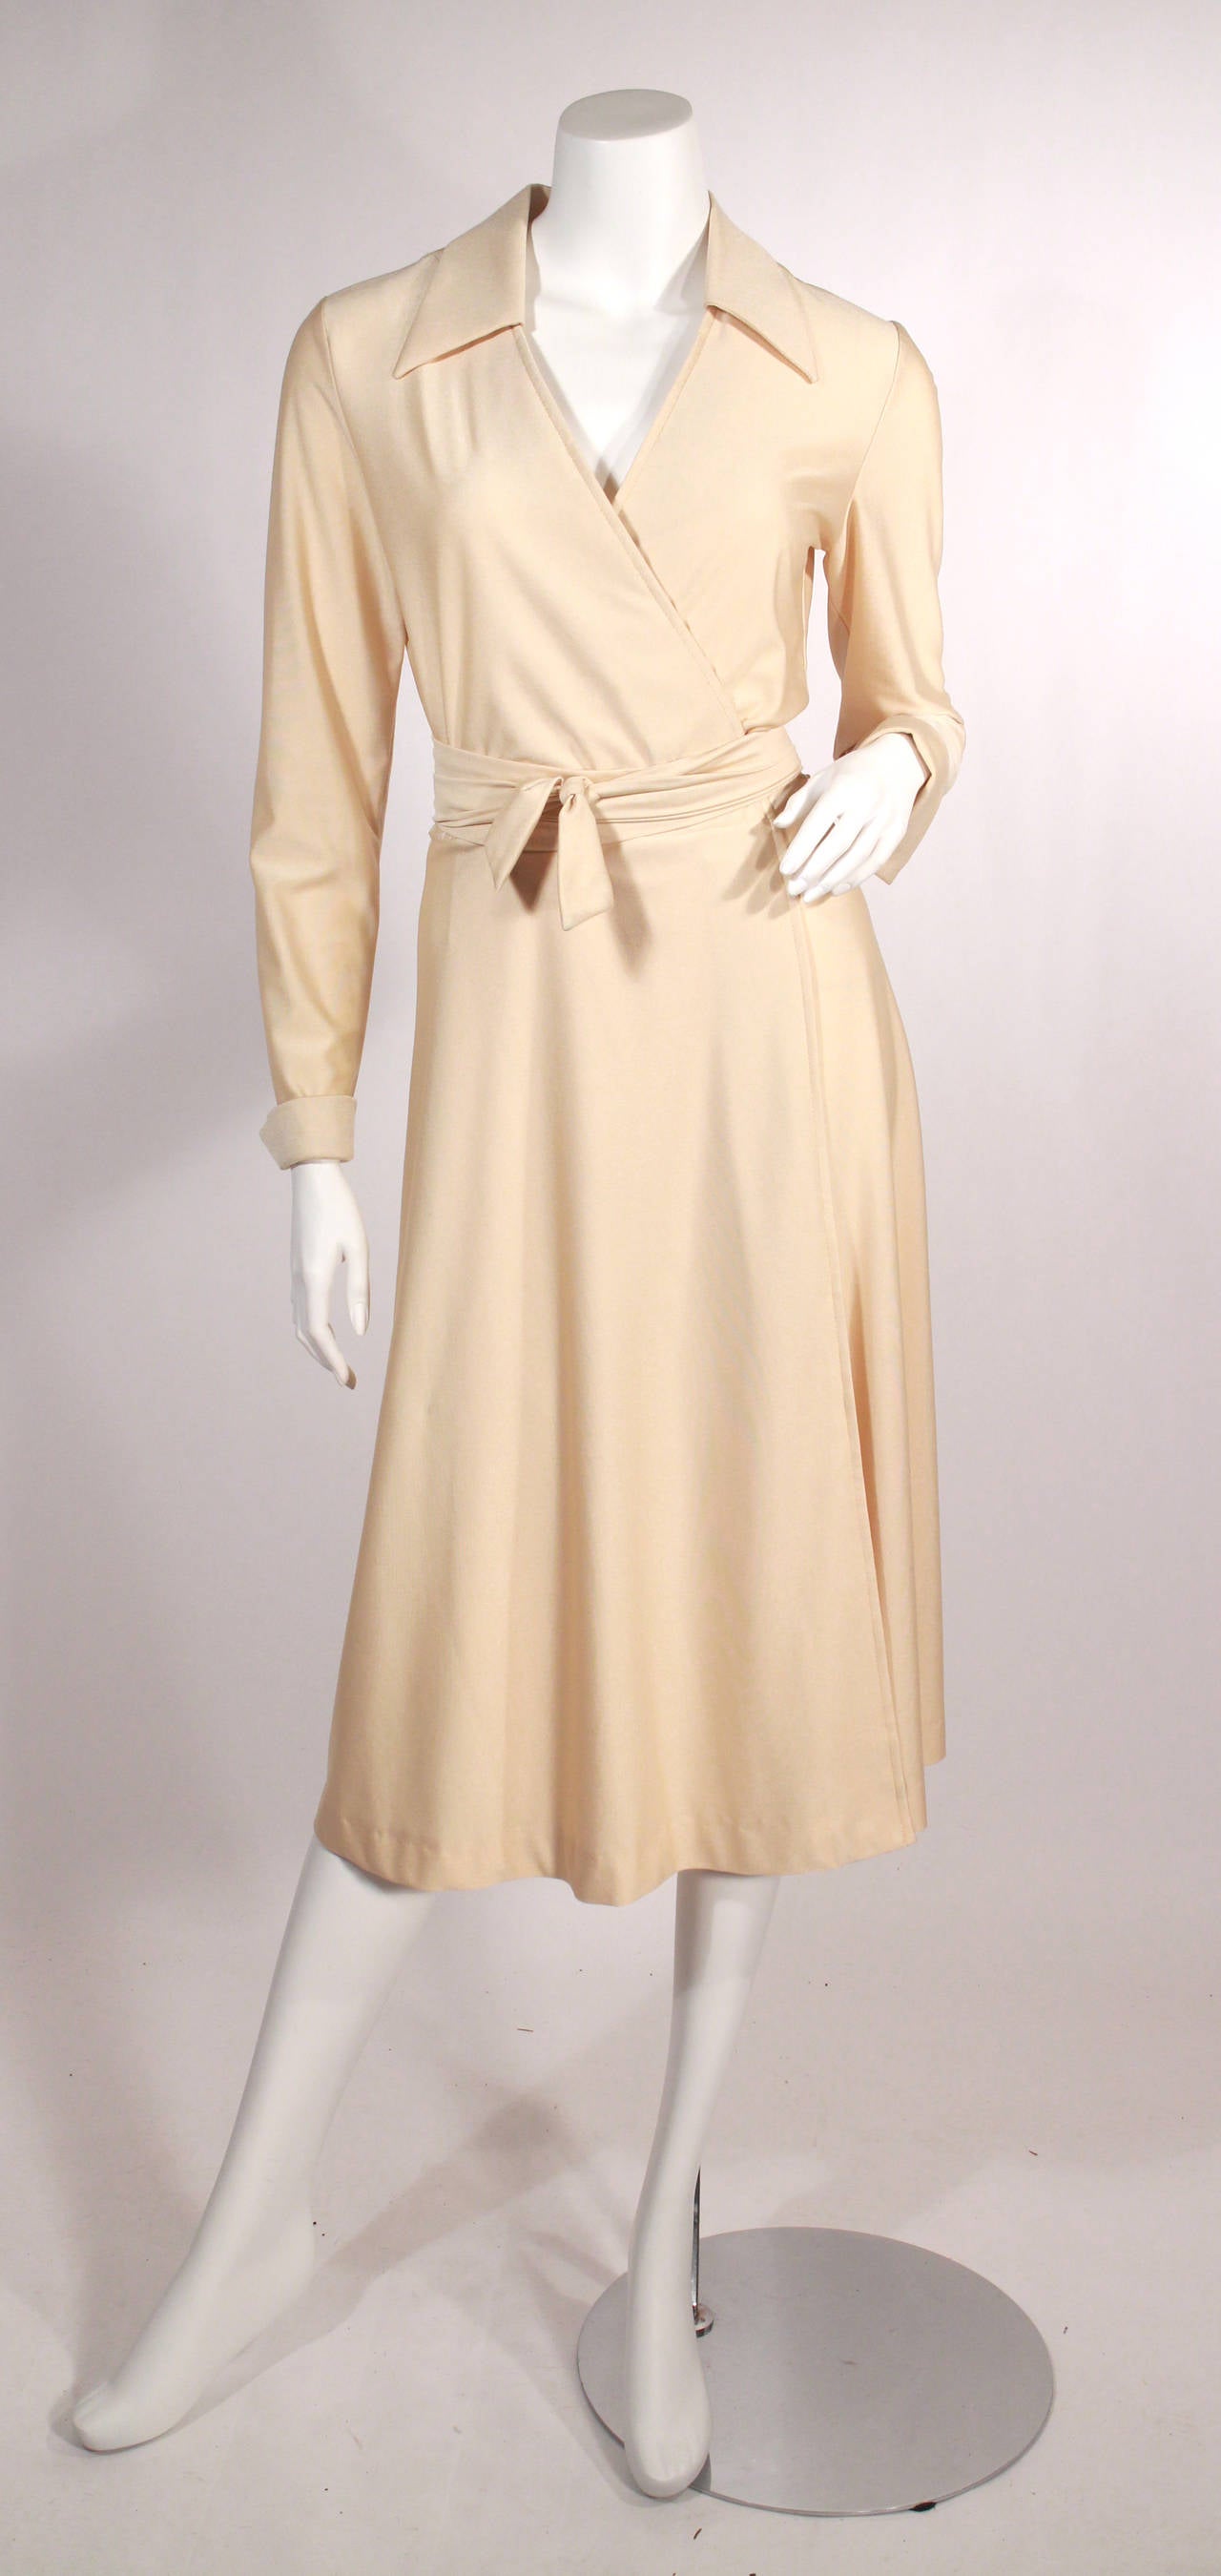 1970's Lanvin off white wrap dress. With collar, and cuffs. This dress is very wearable and beautifully timeless. Marked as size 14, fits Small-Medium, adjustable via wrap.